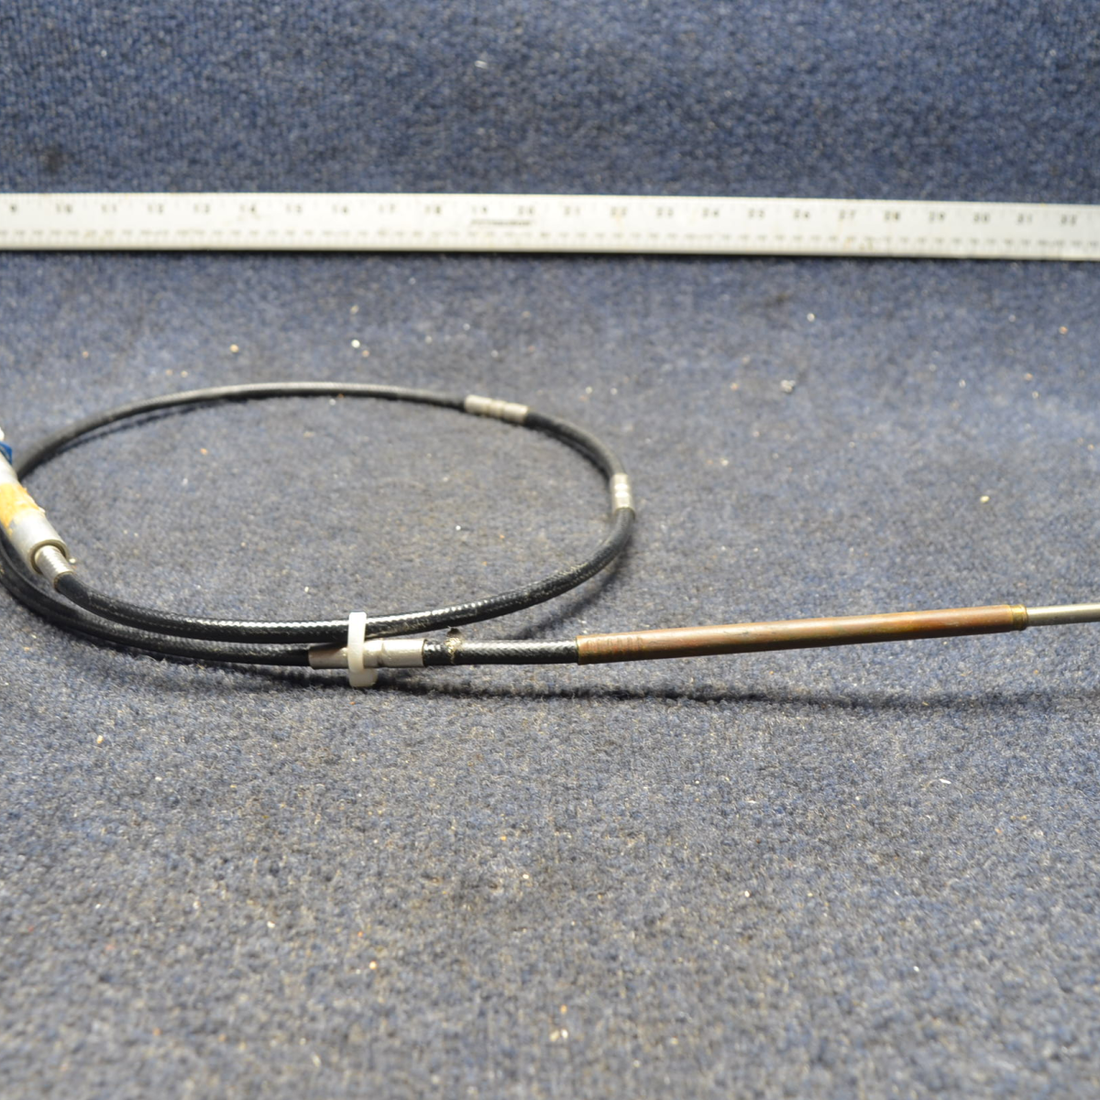 Used aircraft parts for sale, MGS1223-4 PIPER- CESSNA-BEECH- MOONEY VARIOS PROP CONTROL CABLE 56 IN